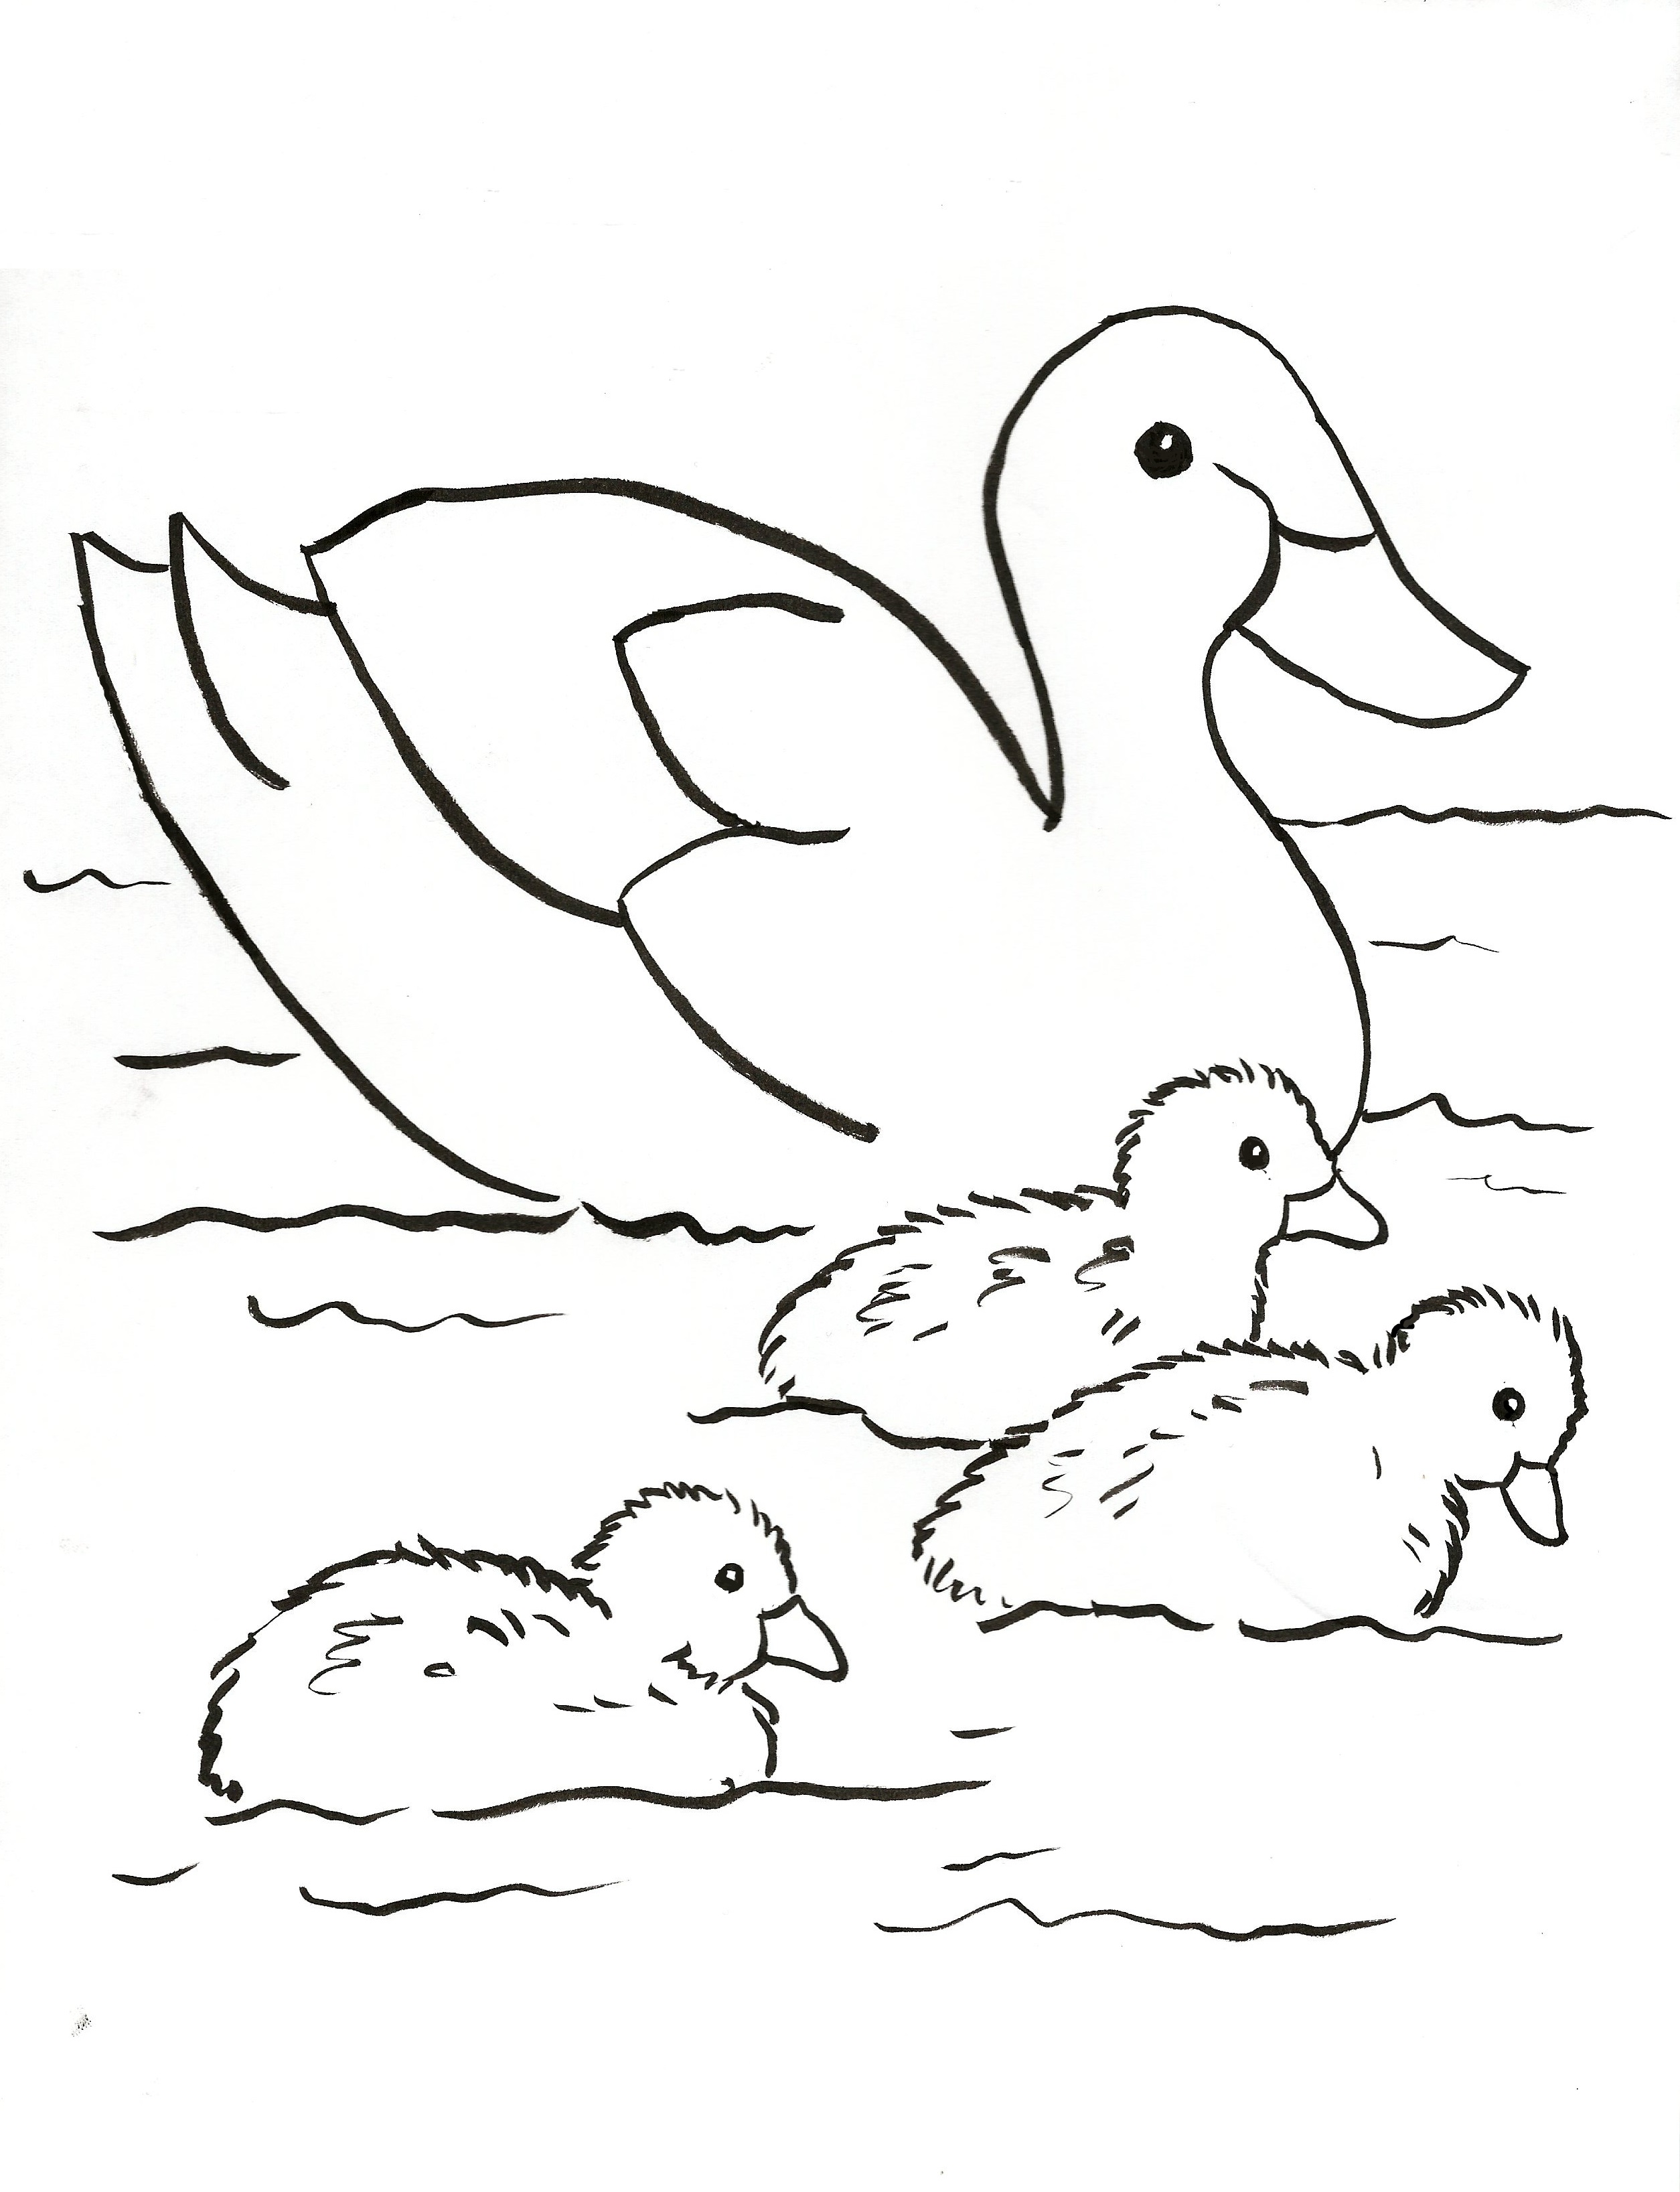 Download New Swan Coloring Pages to Print | Top Free Printable ...